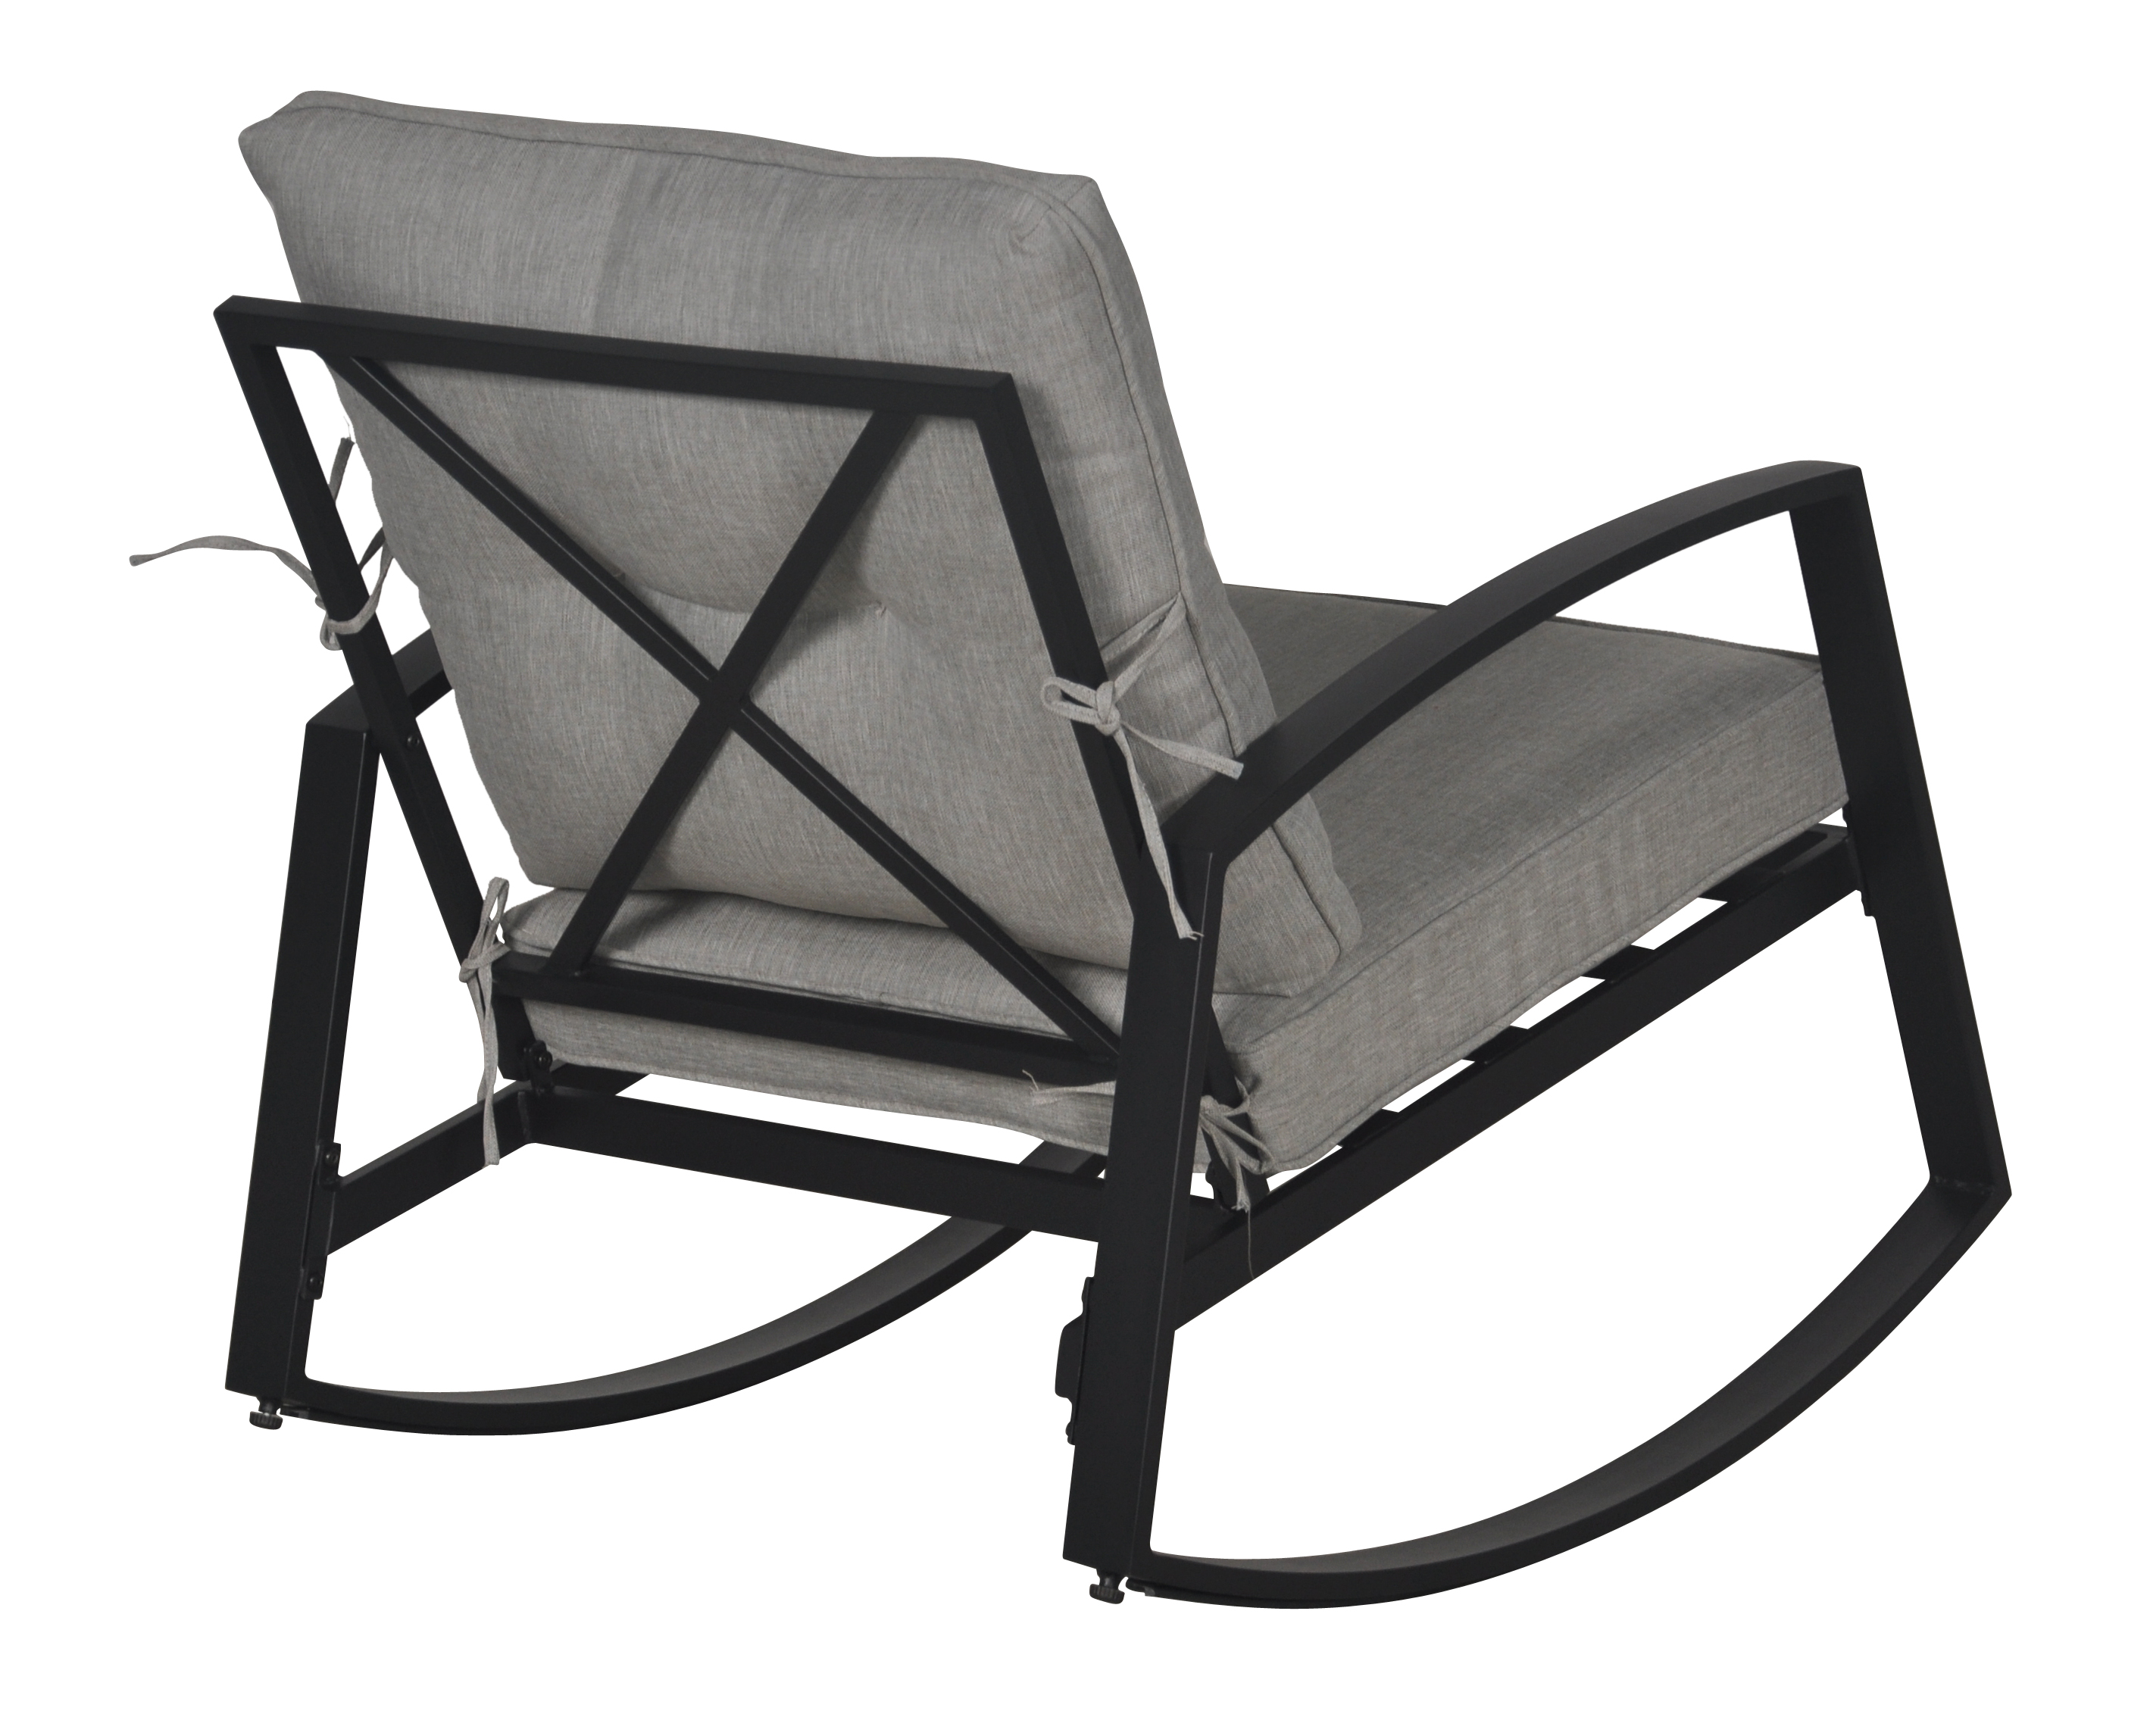 Mainstays Asher Springs 2-Piece Outdoor Furniture Patio Rocker Set -Grey - image 5 of 8